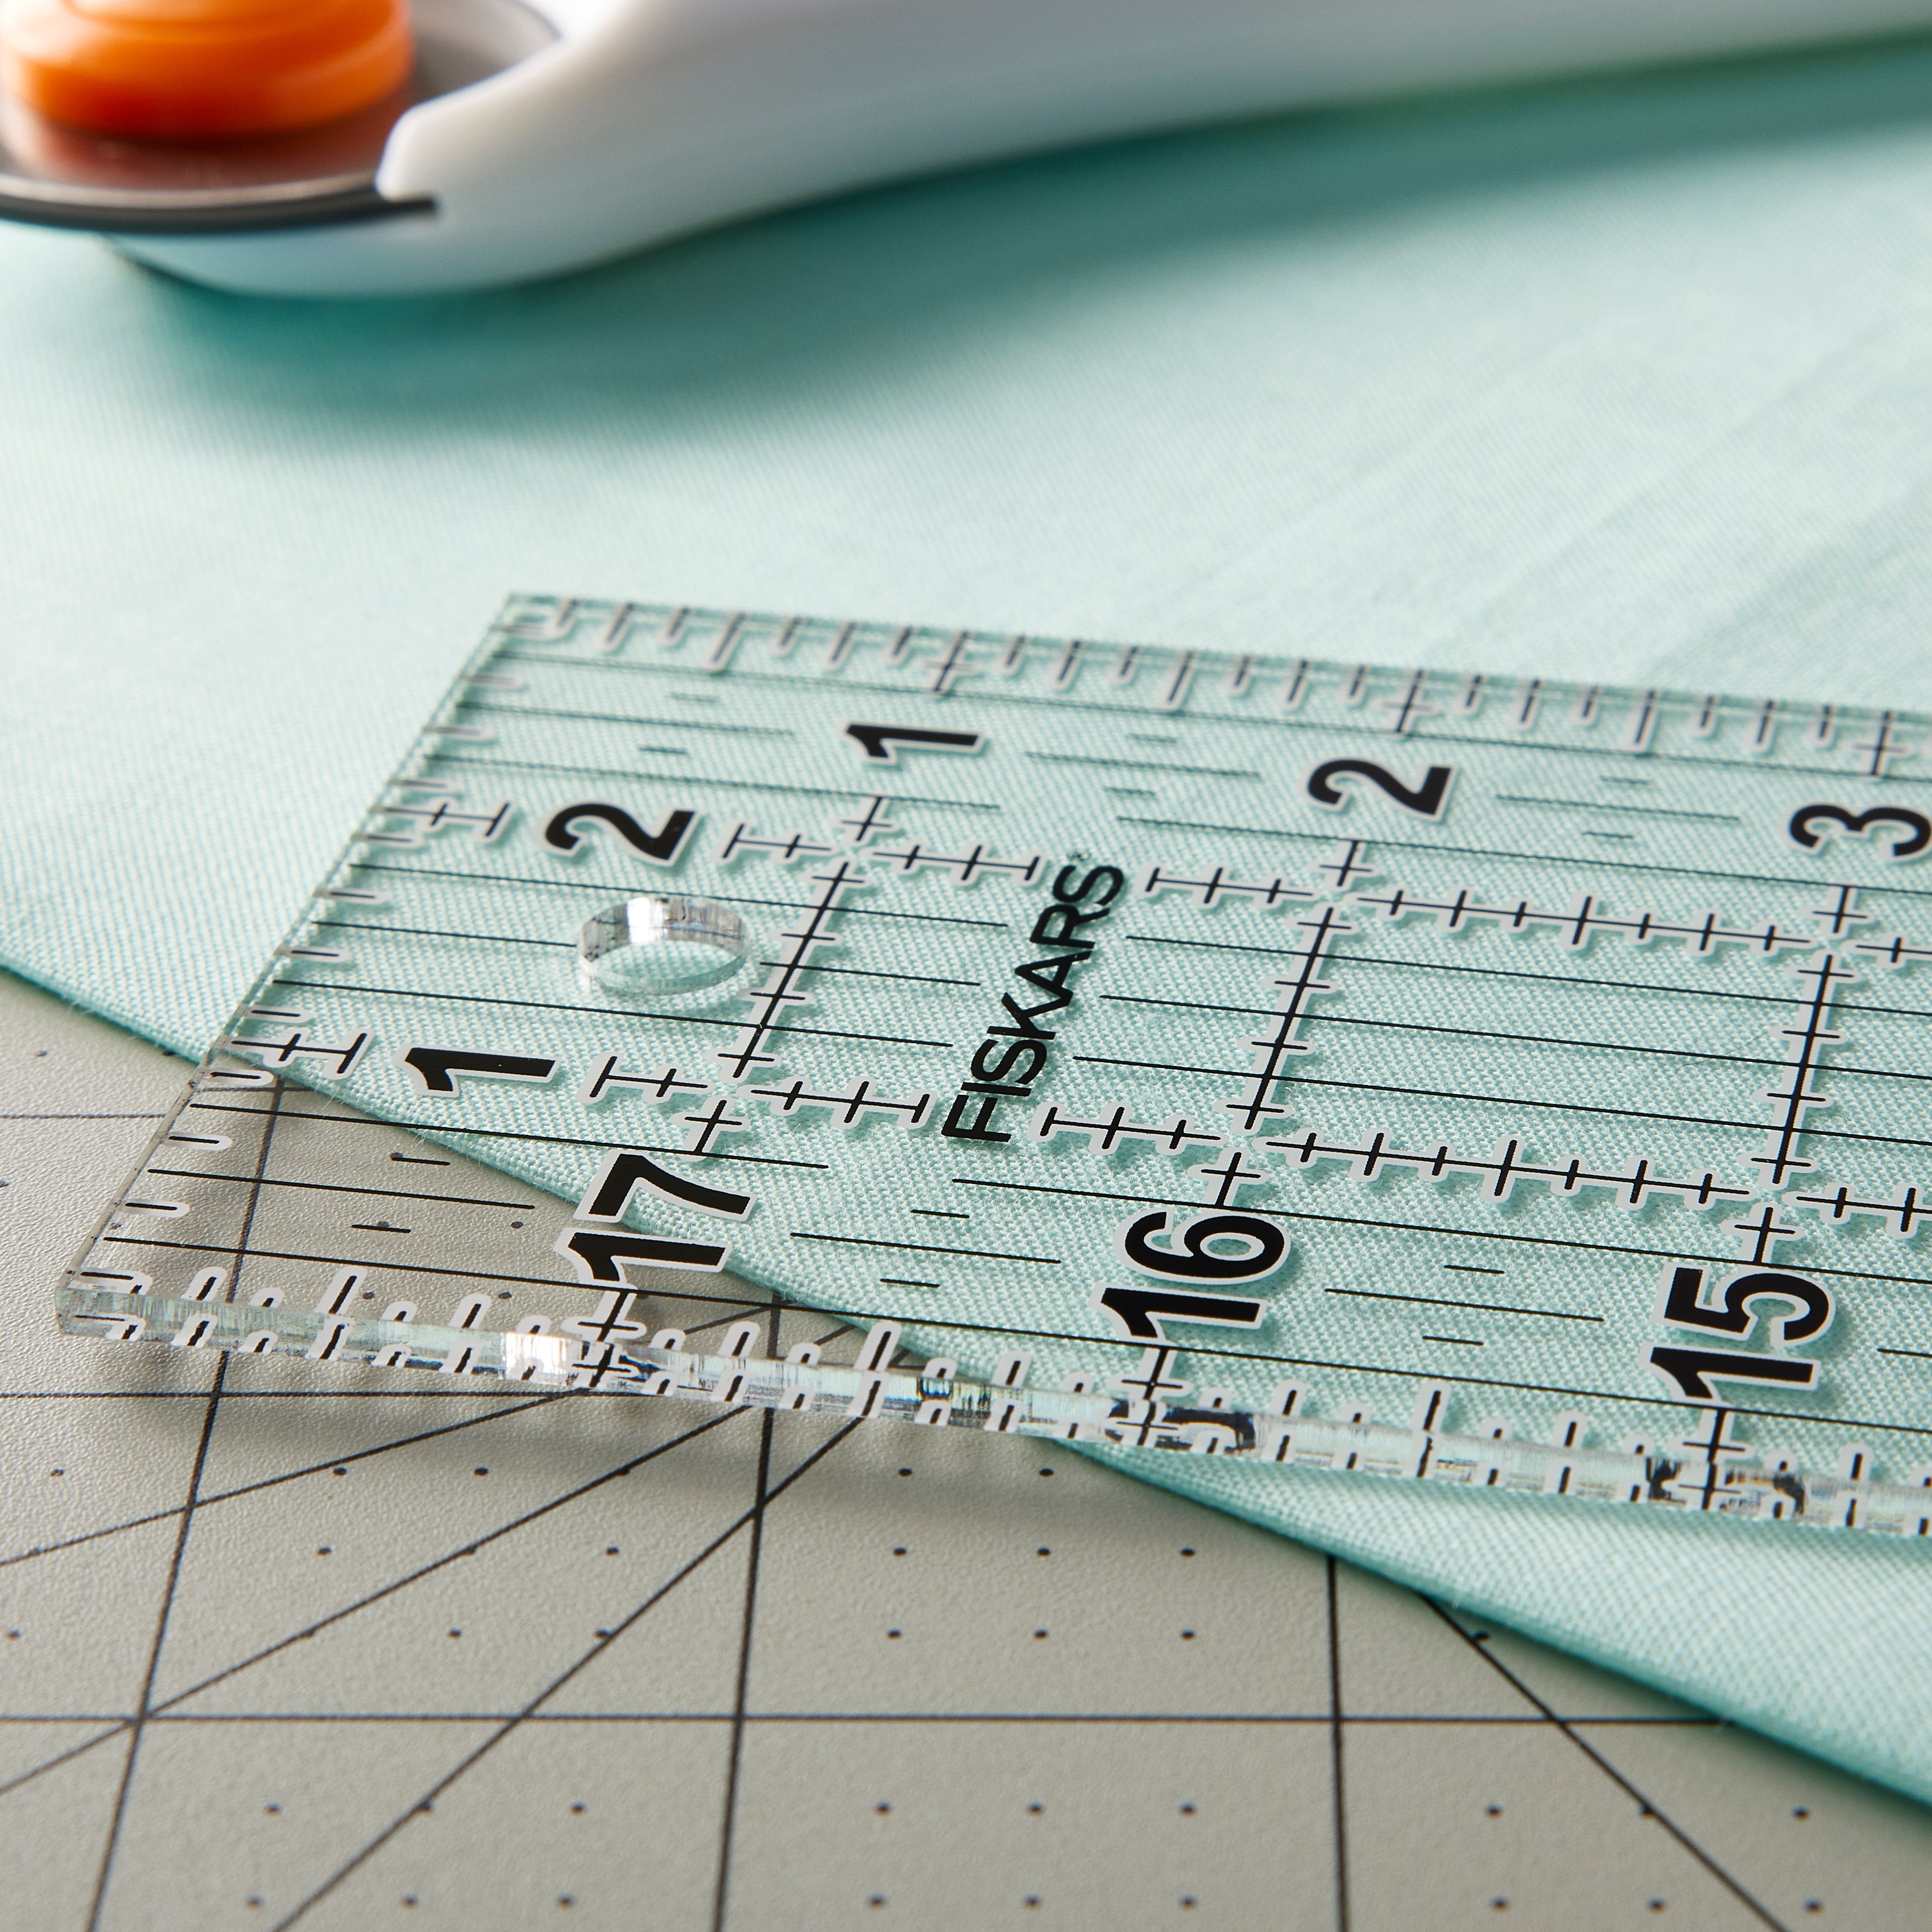  Fiskars Sewing Ruler - 6 x 24 Acrylic Ruler - Sewing and  Quilting Ruler with Gridlines - Arts and Craft Supplies - Clear/Red